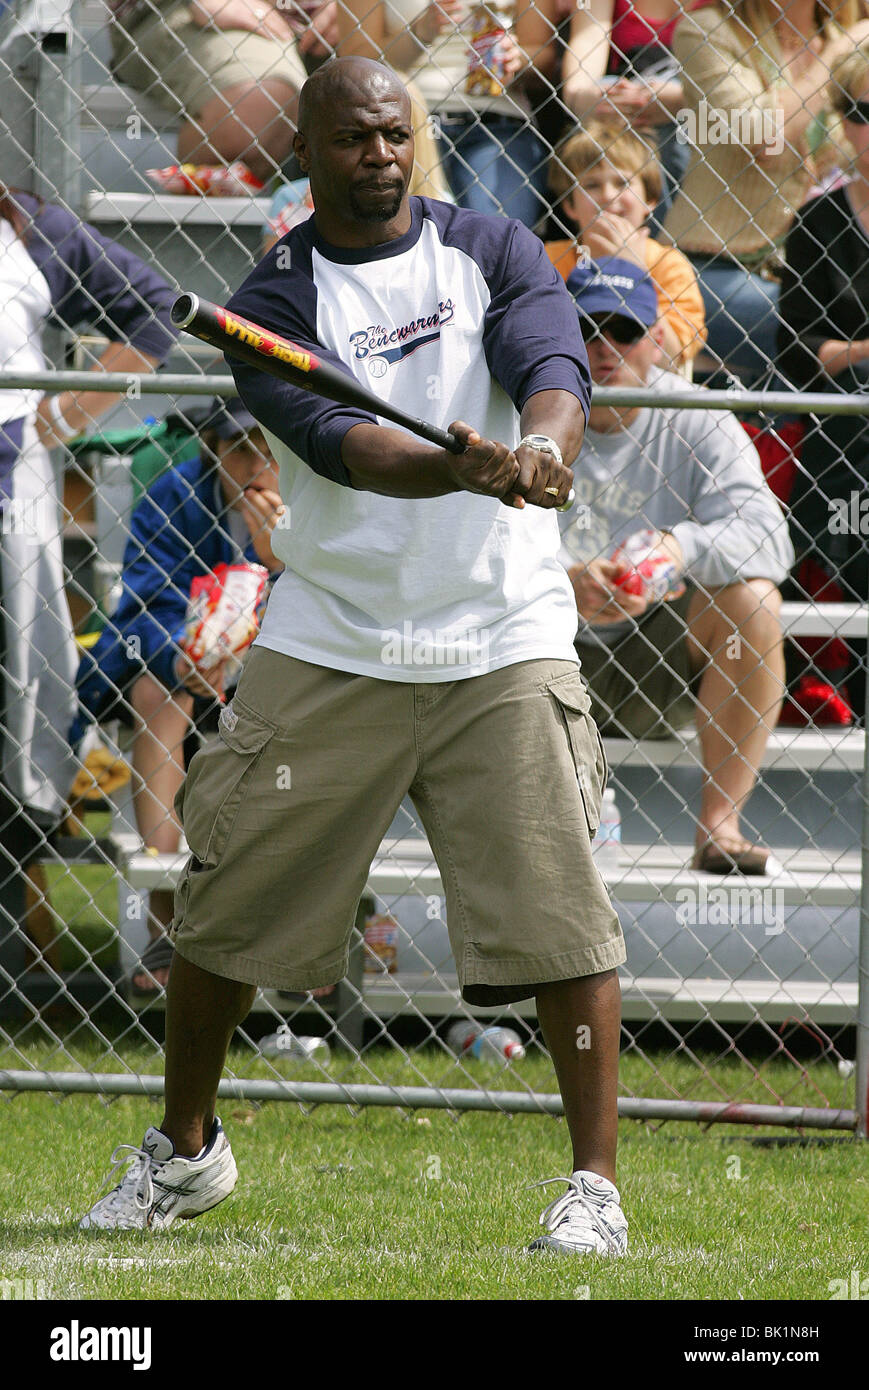 TERRY ALAN CREWS BENCHWARMERS GAME UCLA WESTWOOD LOS ANGELES USA 02 April 2006 Stock Photo